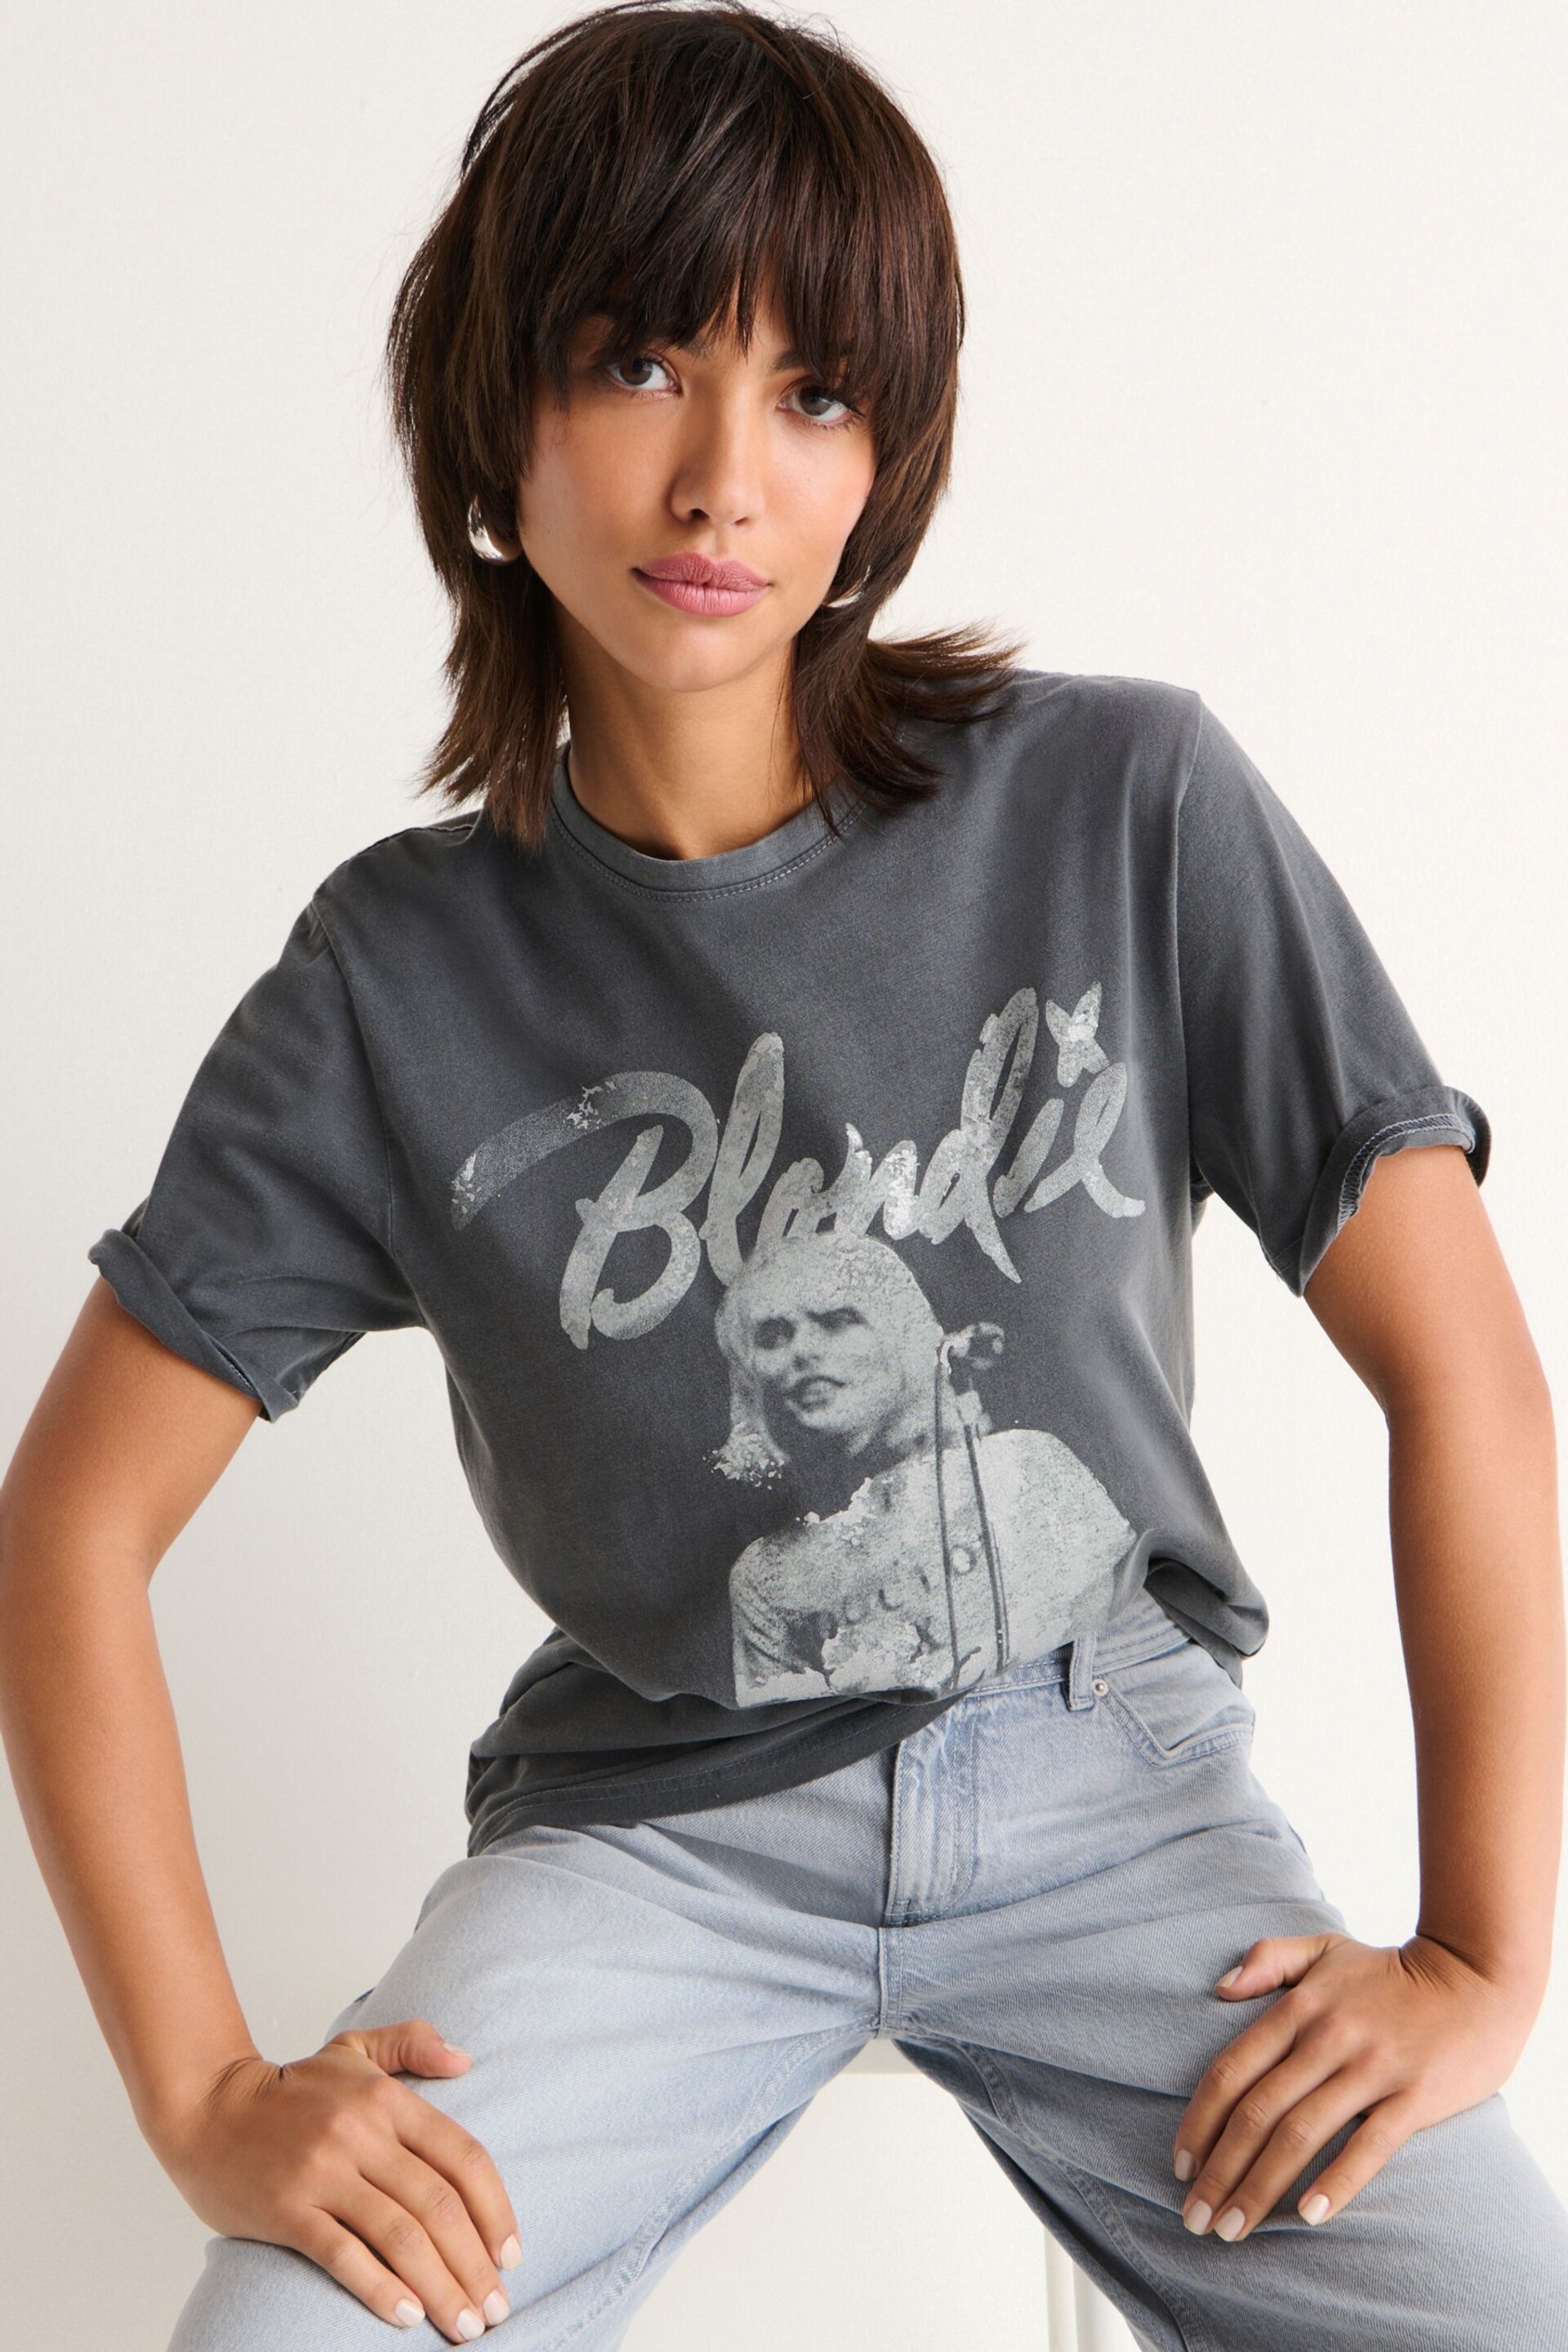 Charcoal Grey License Blondie Short Sleeve Graphic Band T-Shirt - Image 1 of 7